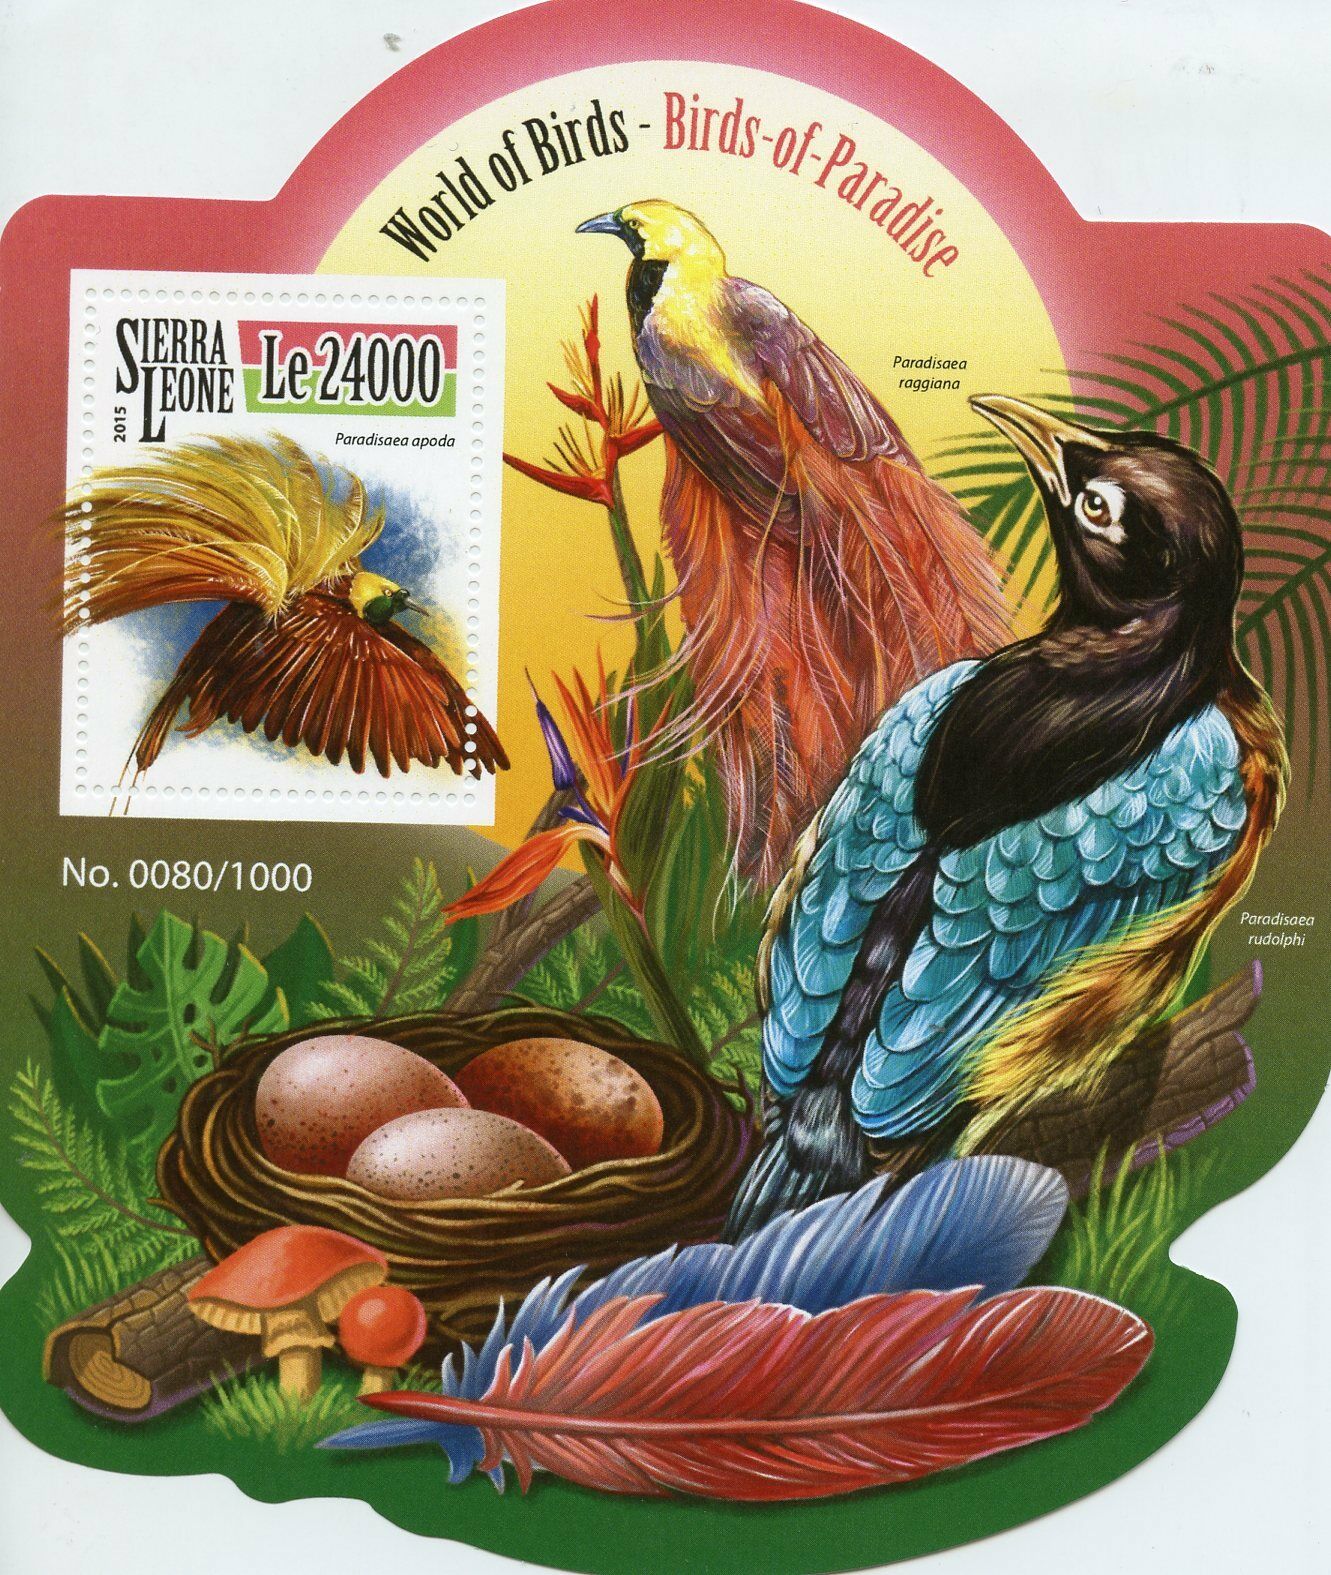 Sierra Leone 2015 MNH Birds of Paradise 1v S/S Greater Bird-of-Paradise Stamps